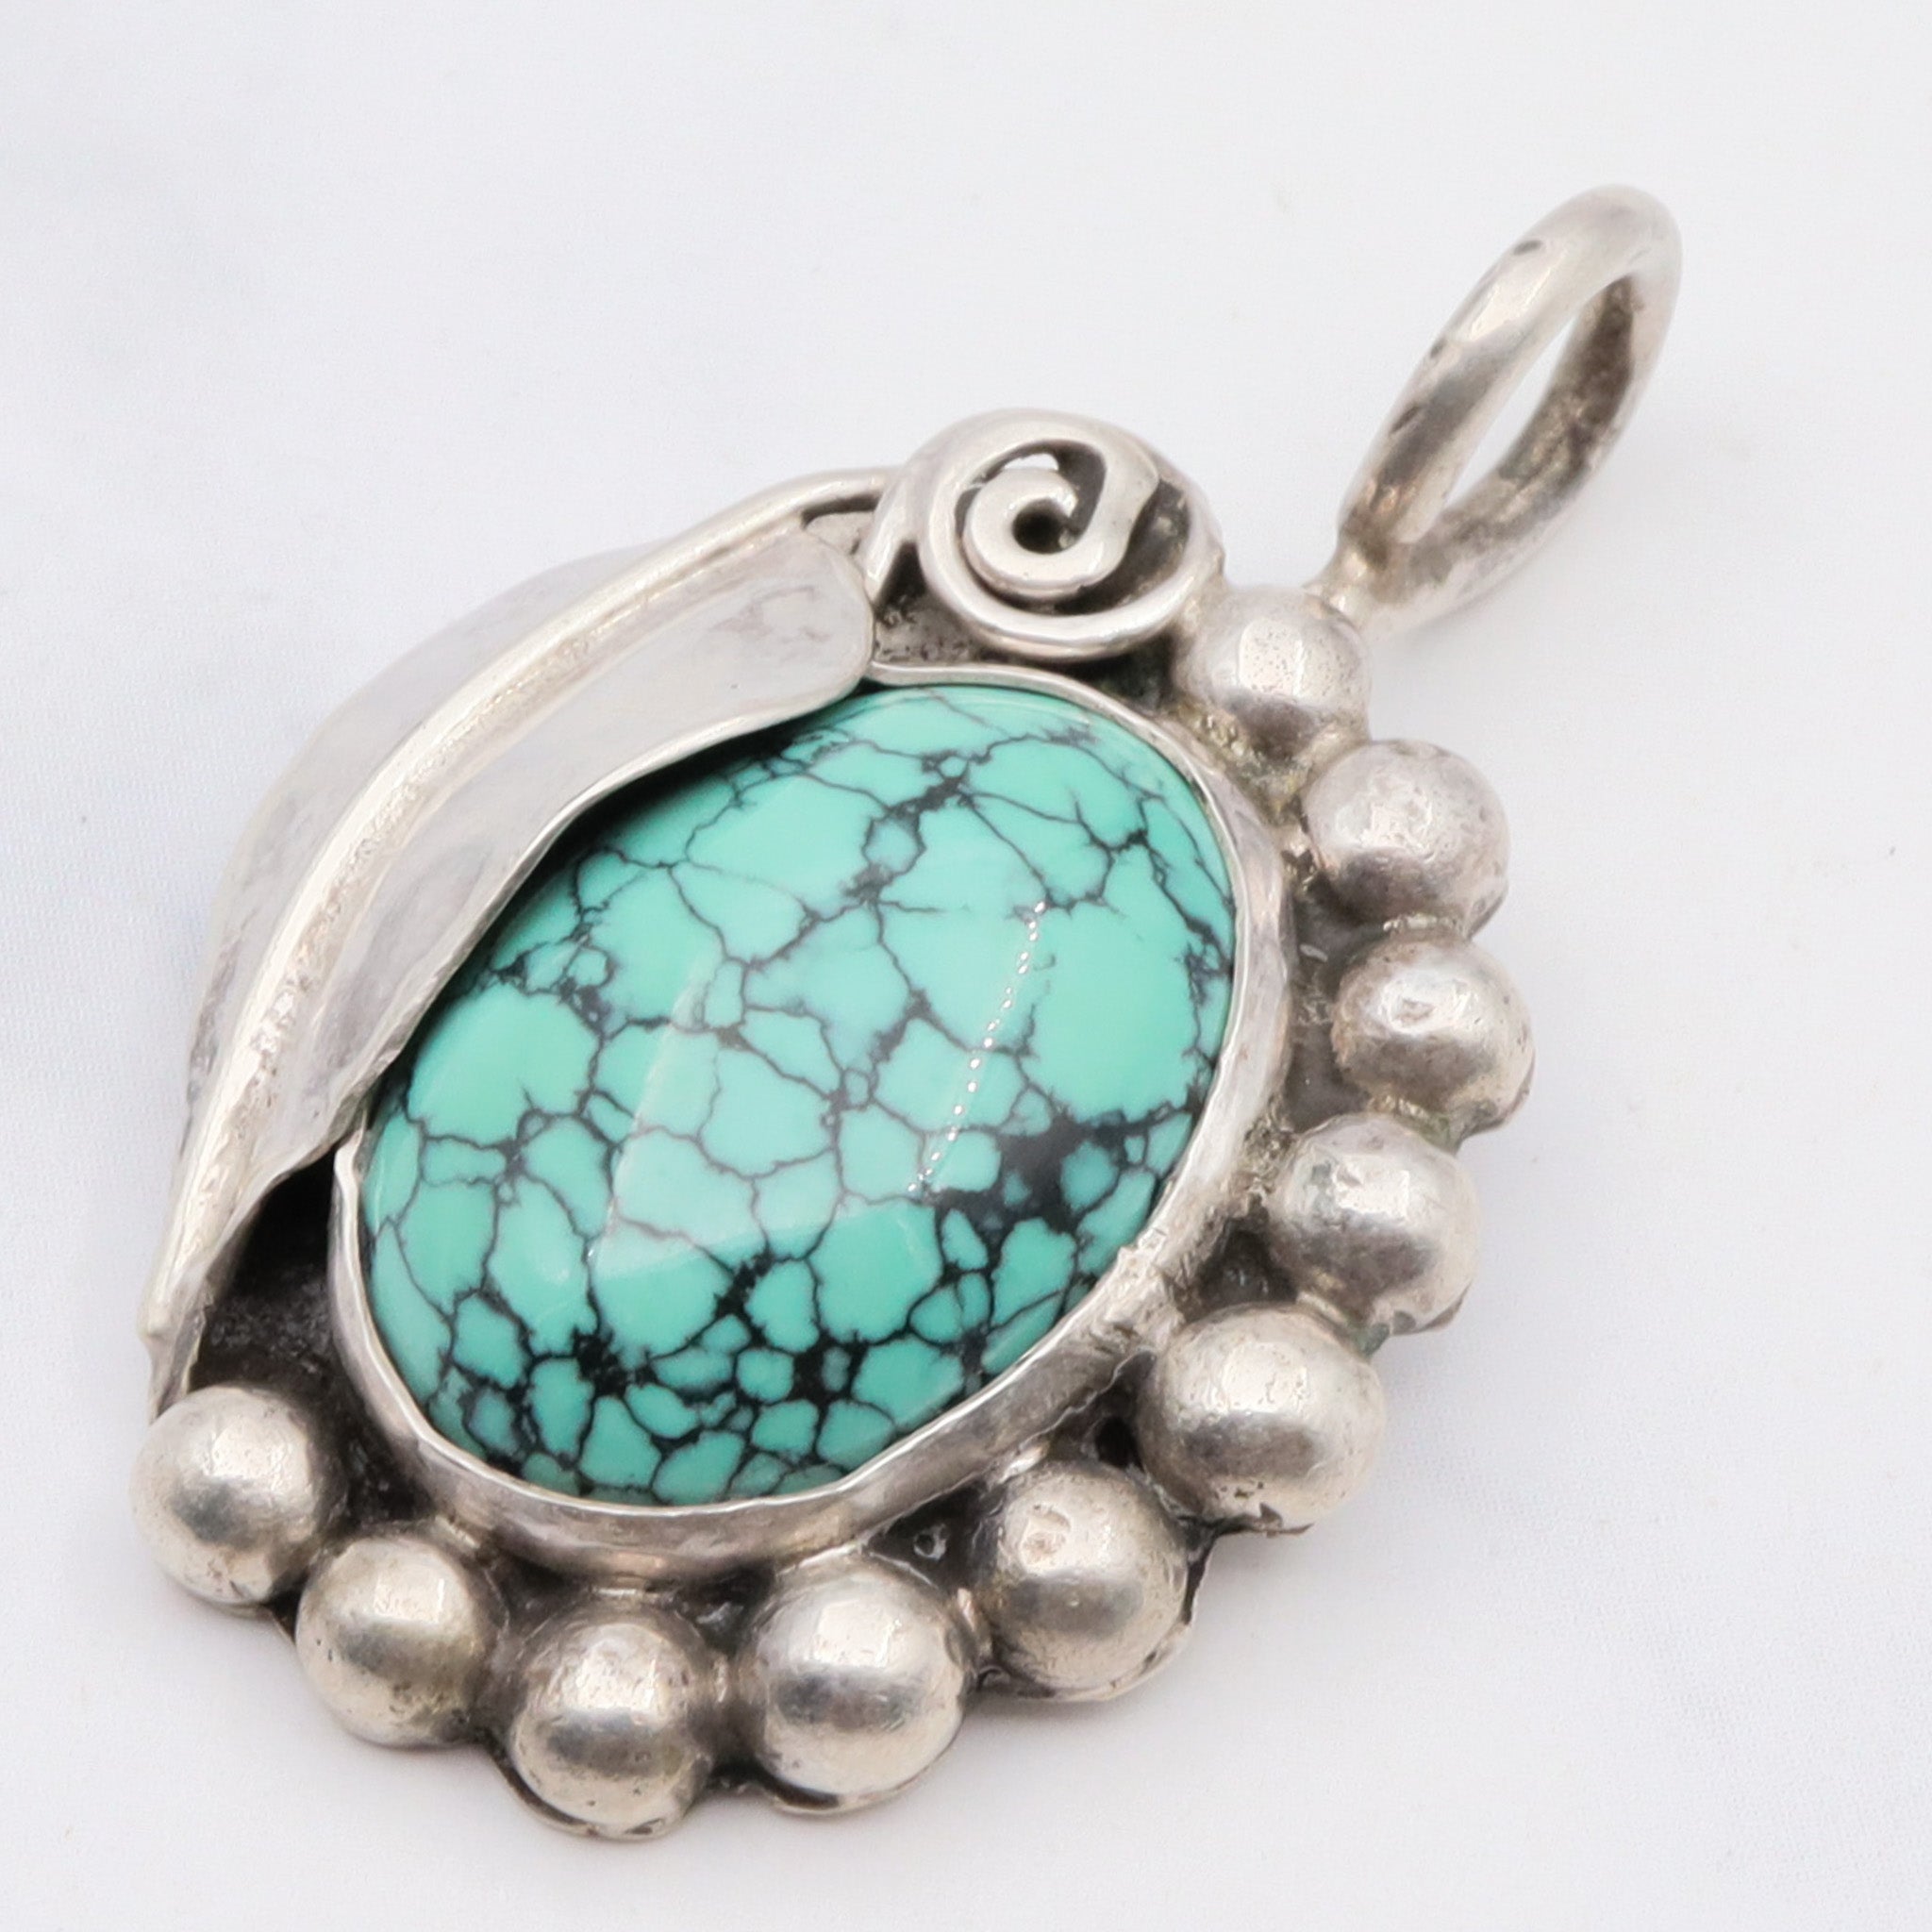 Native American sterling silver and turquoise handmade leaf pendant